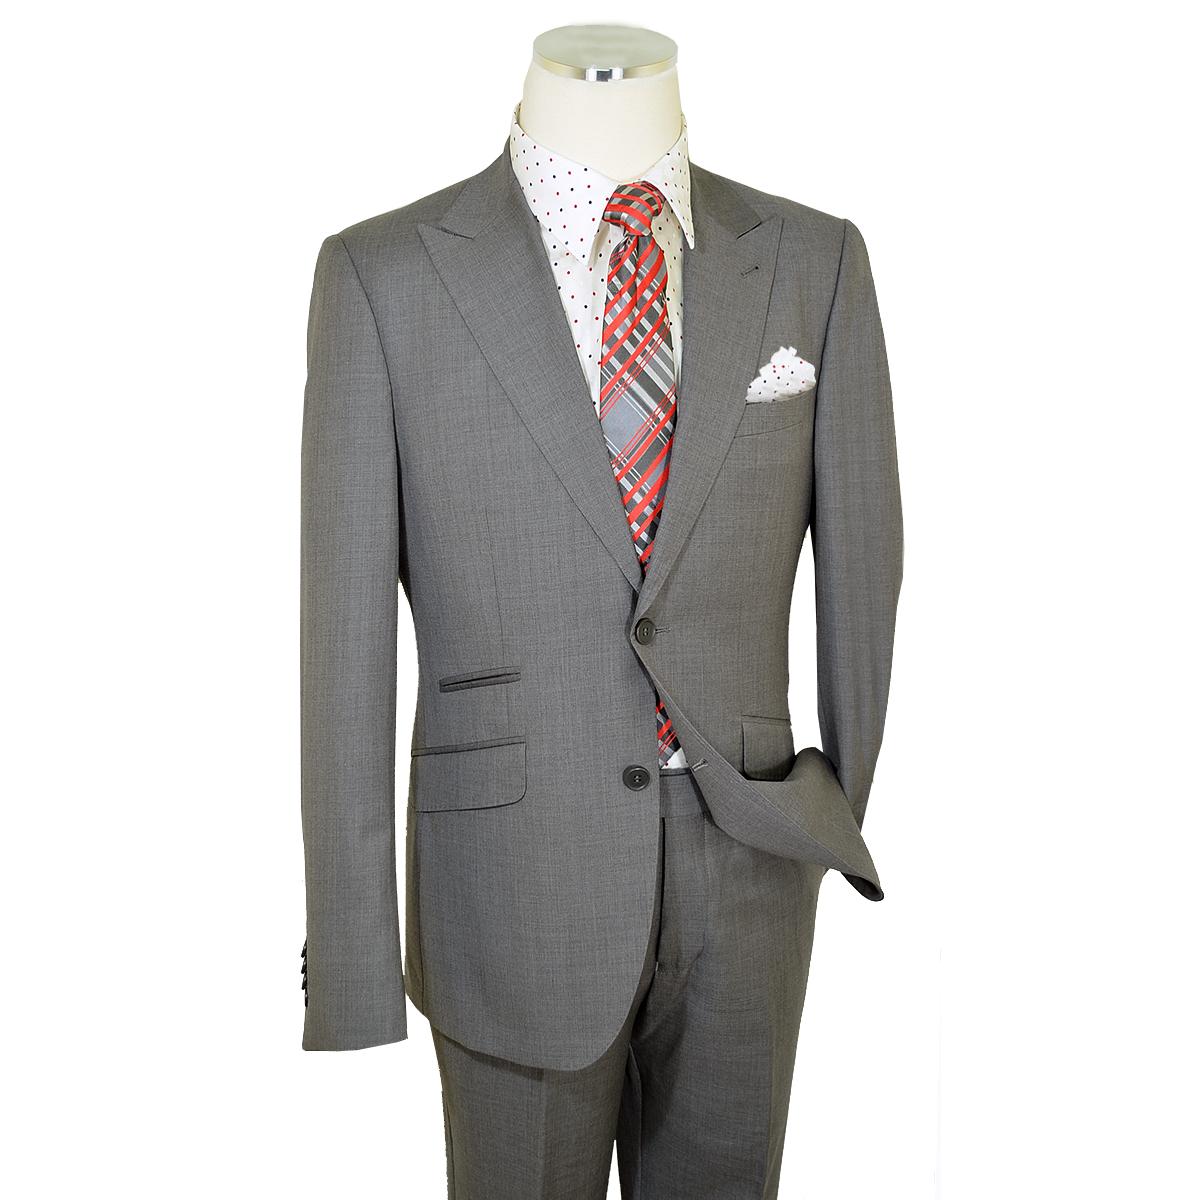 Demi top hat glamour men's suit ice grey 100% made in Italy